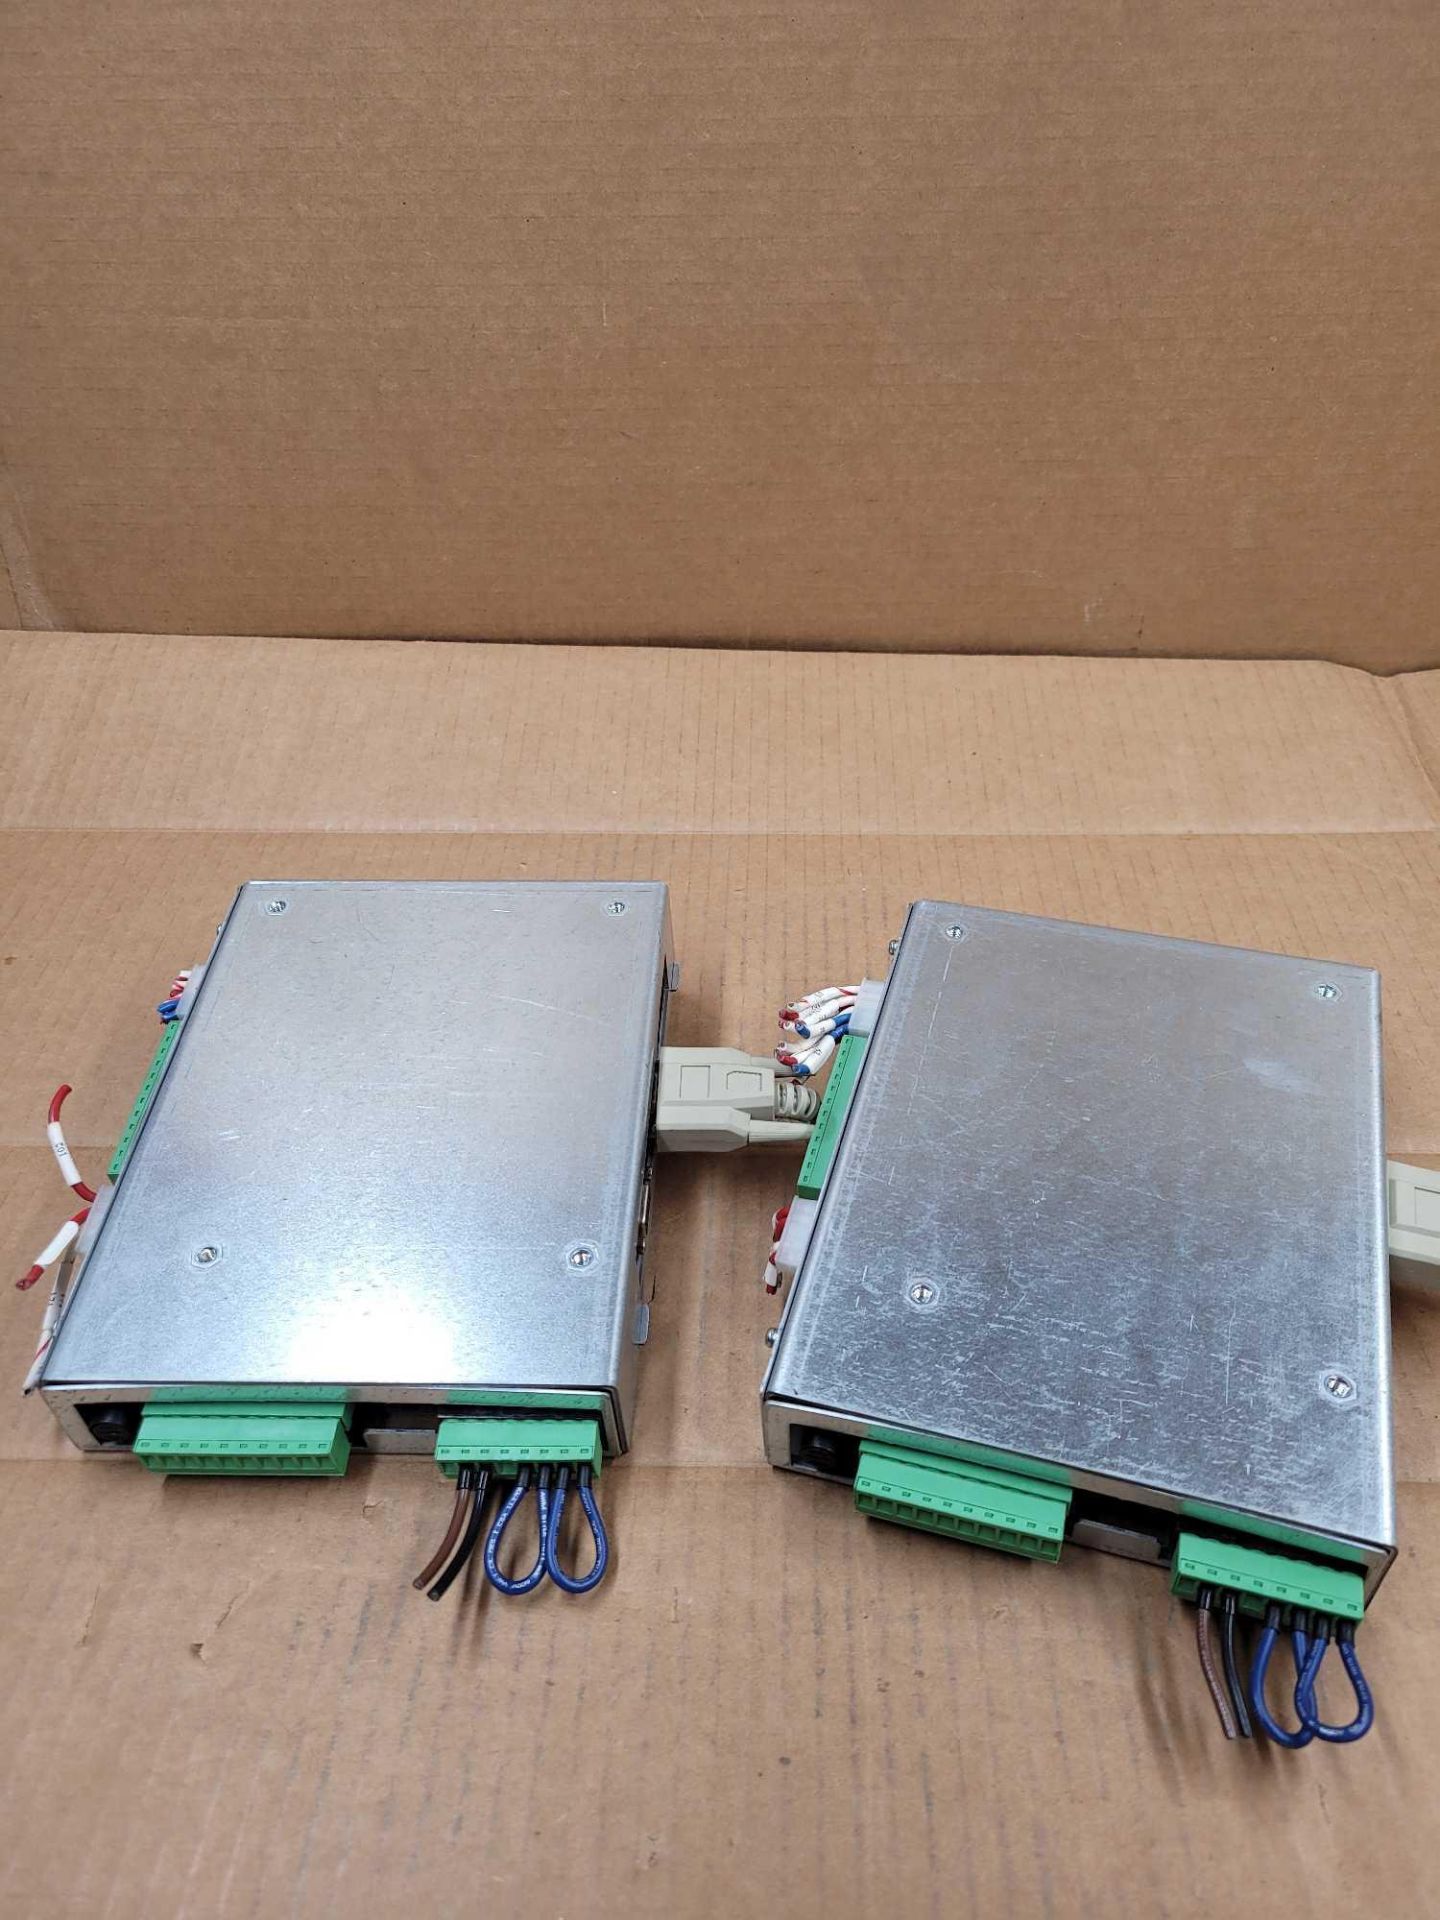 LOT OF 2 WTC 917-0146 / 900-8573-4M1 Timing Module  /  Lot Weight: 5.2 lbs - Image 6 of 6